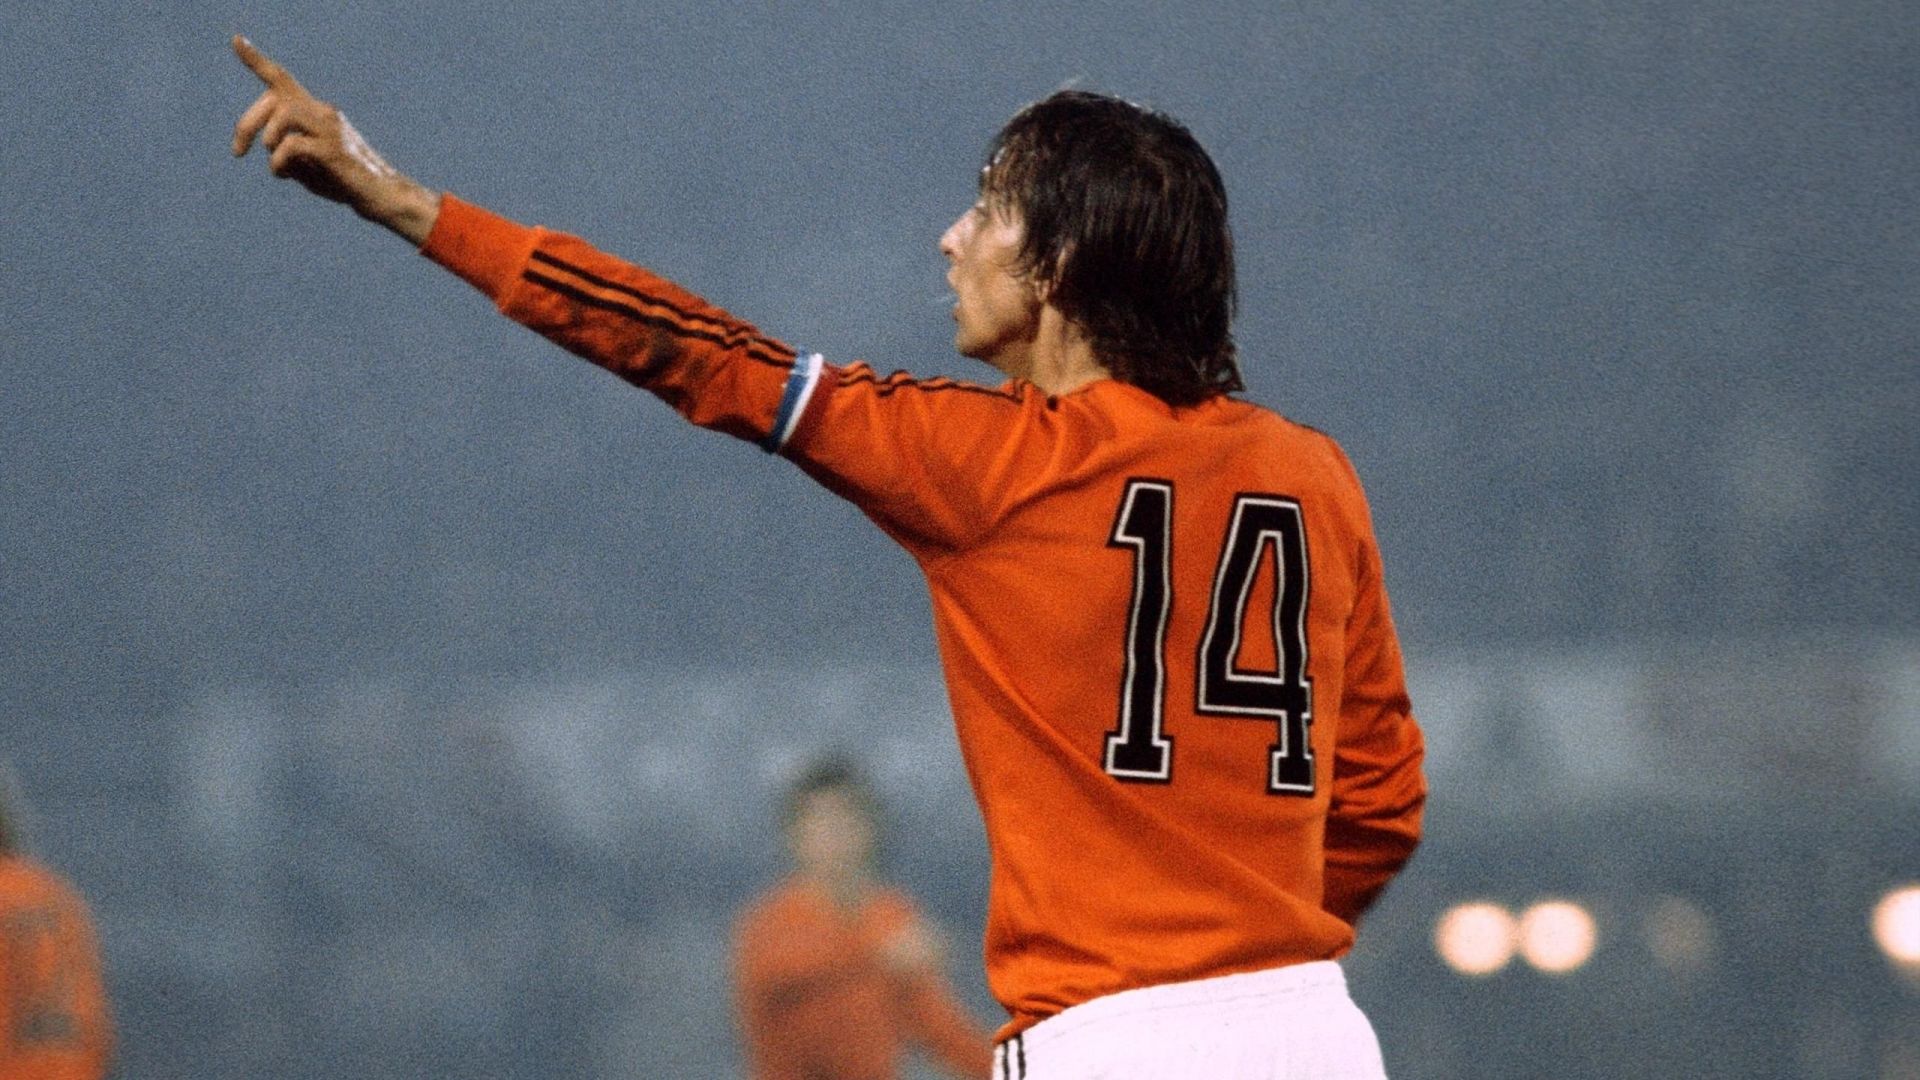 Free download Johan Cruyff Wallpaper - in Collection Page